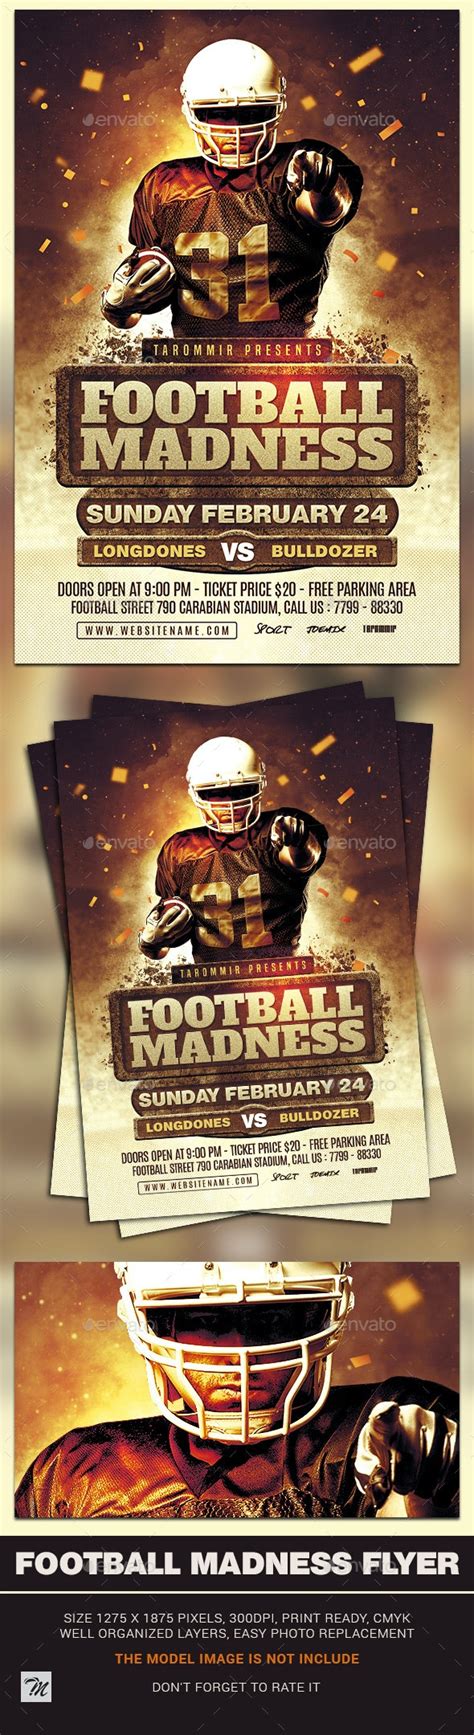 Football Madness Flyer Print Templates Graphicriver